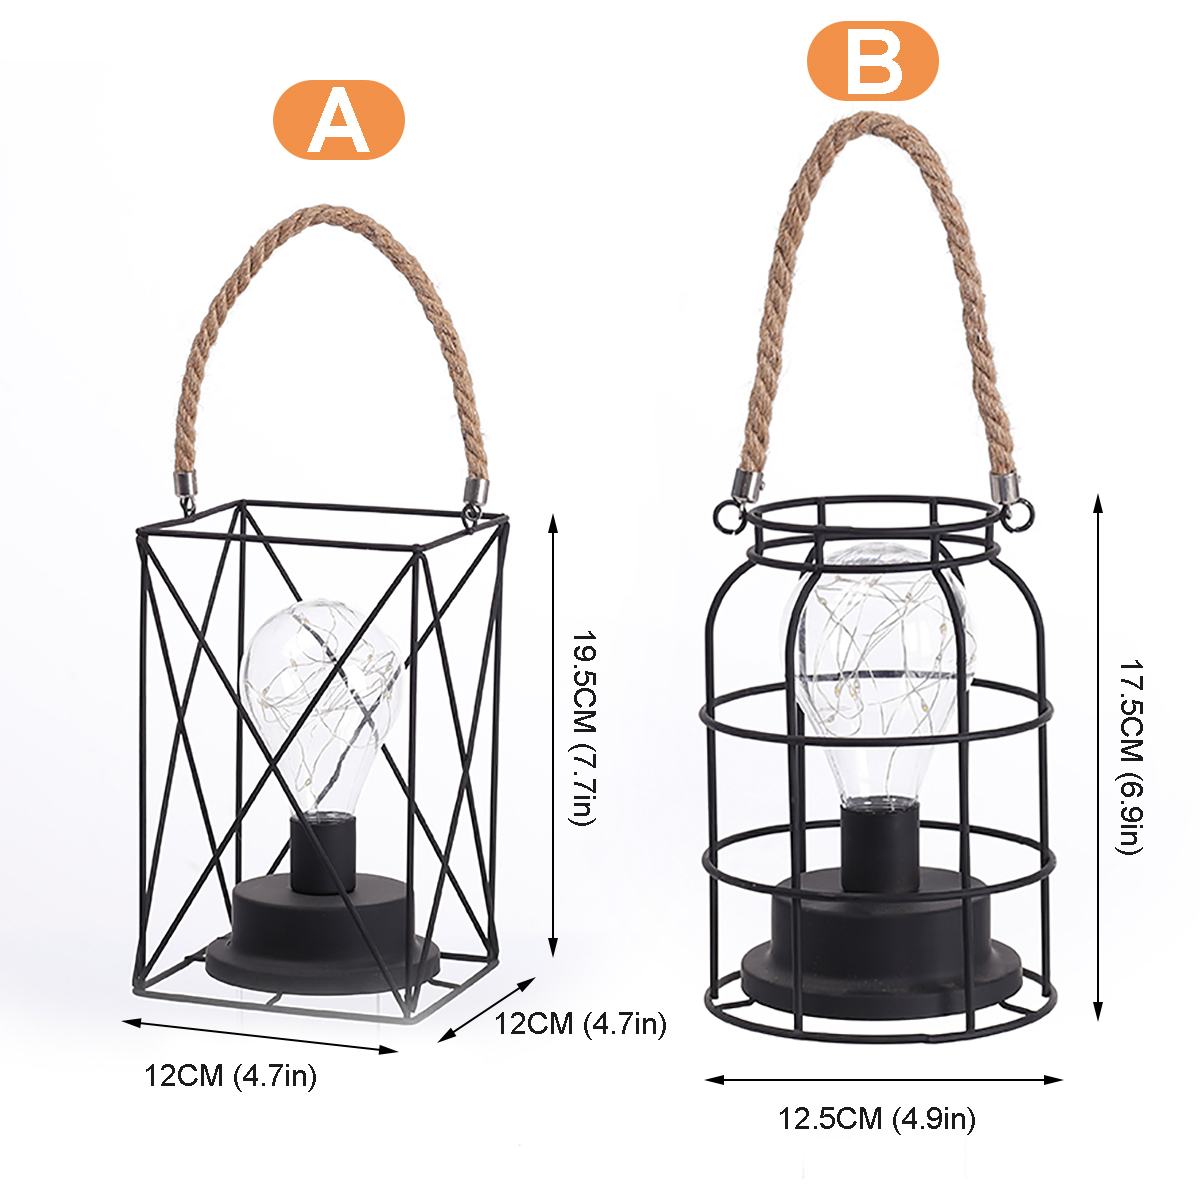 Retro-Cage-Light-Mini-Metal-Battery-Powered-LED-Bulb-Lamp-for-Living-Room-Bedroom-Kitchen-Wedding-Ch-1733946-2